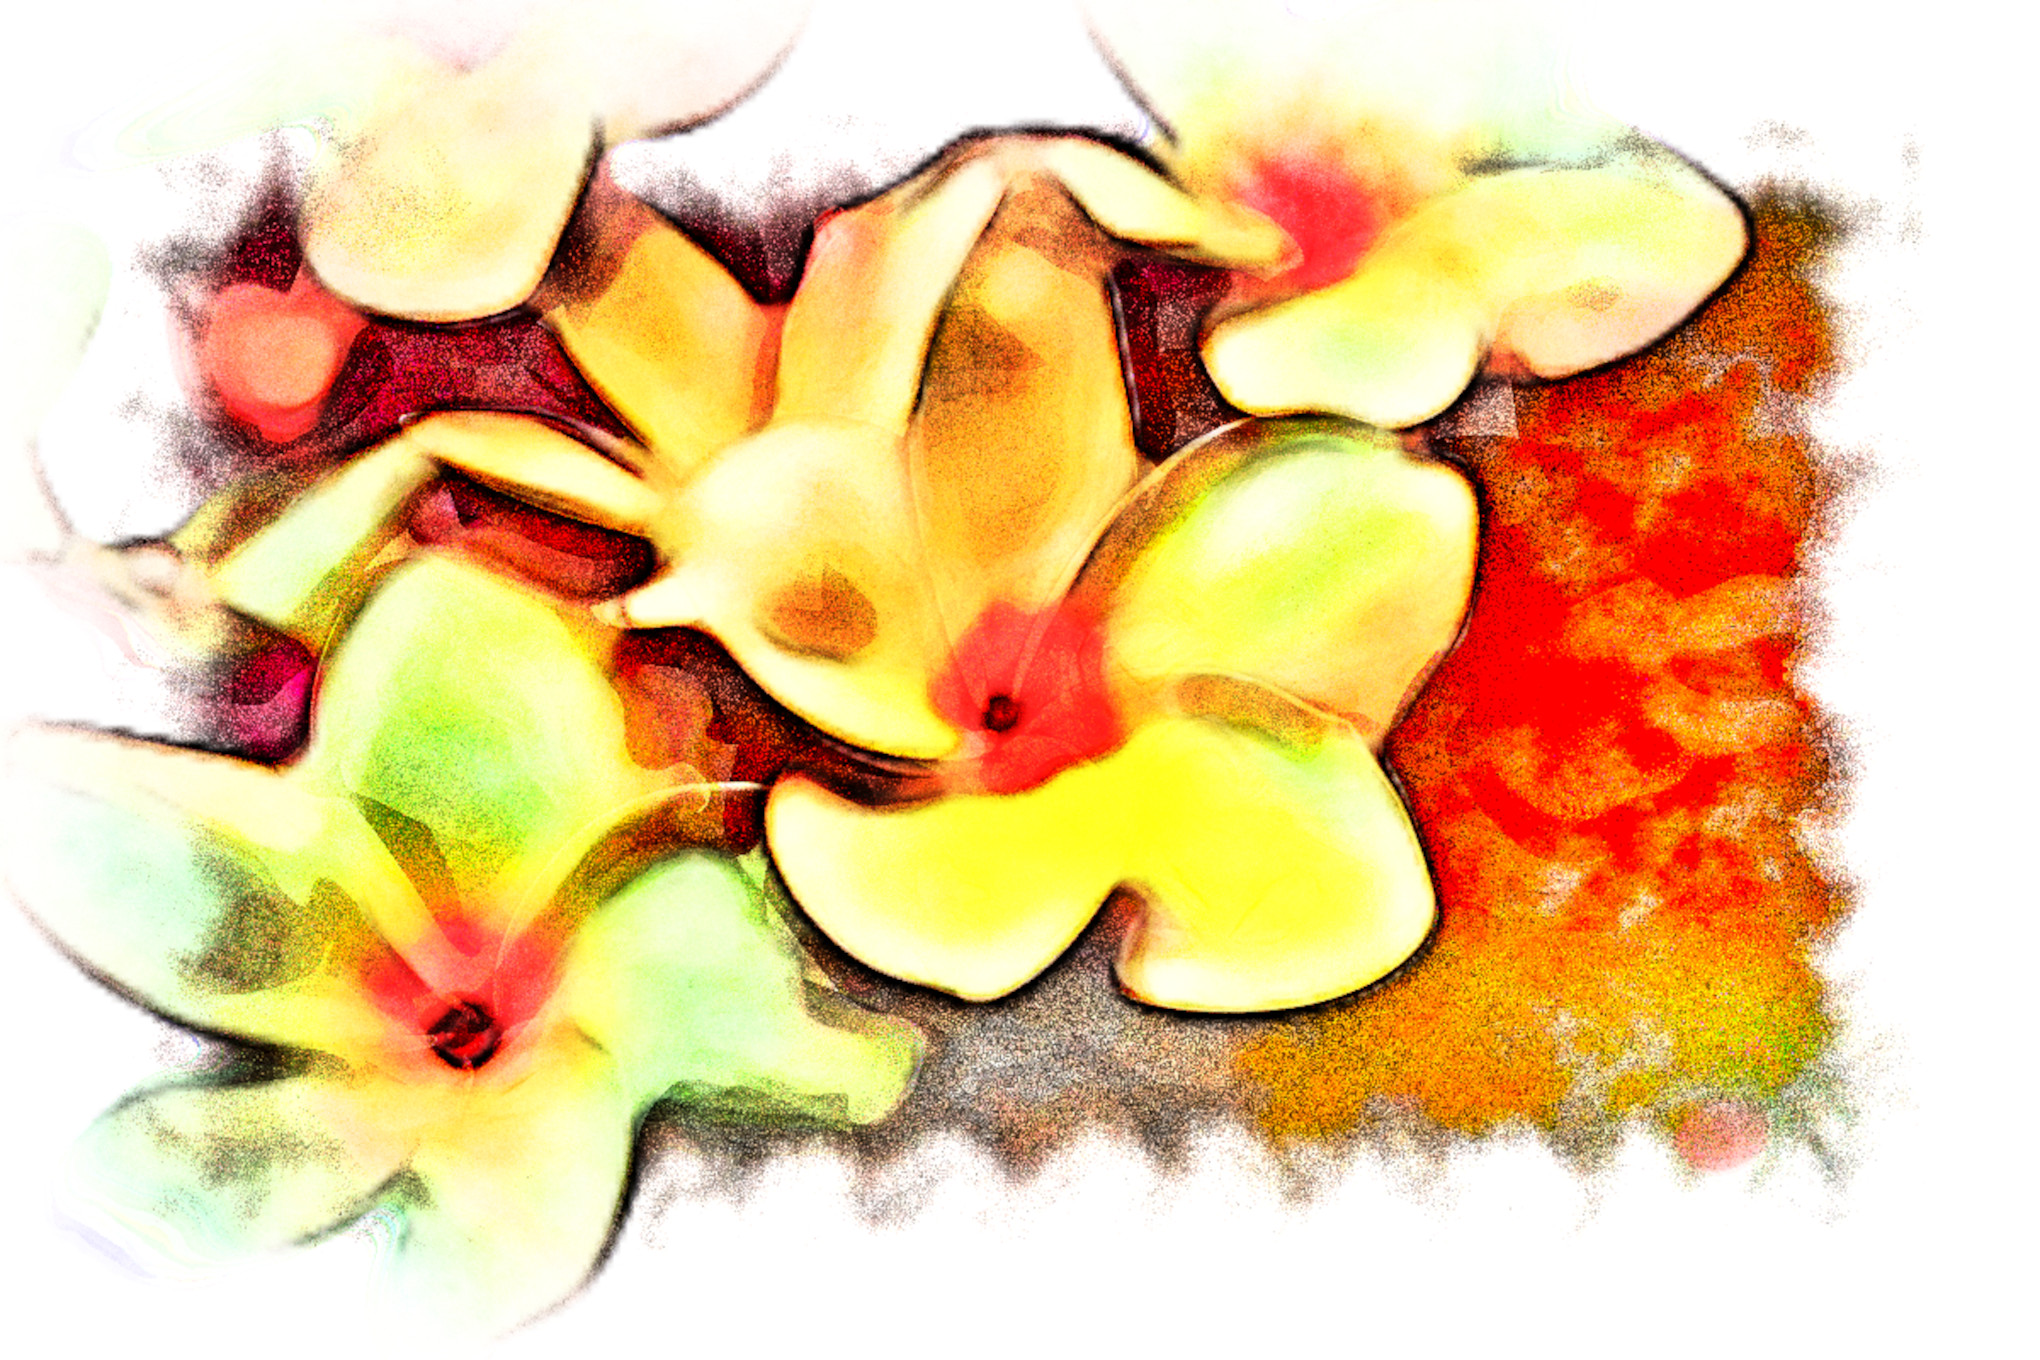 2023-10-04 09-44-29 blossoms-4836548 with a Watercolor Pastels Effect 2023 (20.0,100.0,35.0,60.0,0.0,0.0,100.0,True,0).jpg